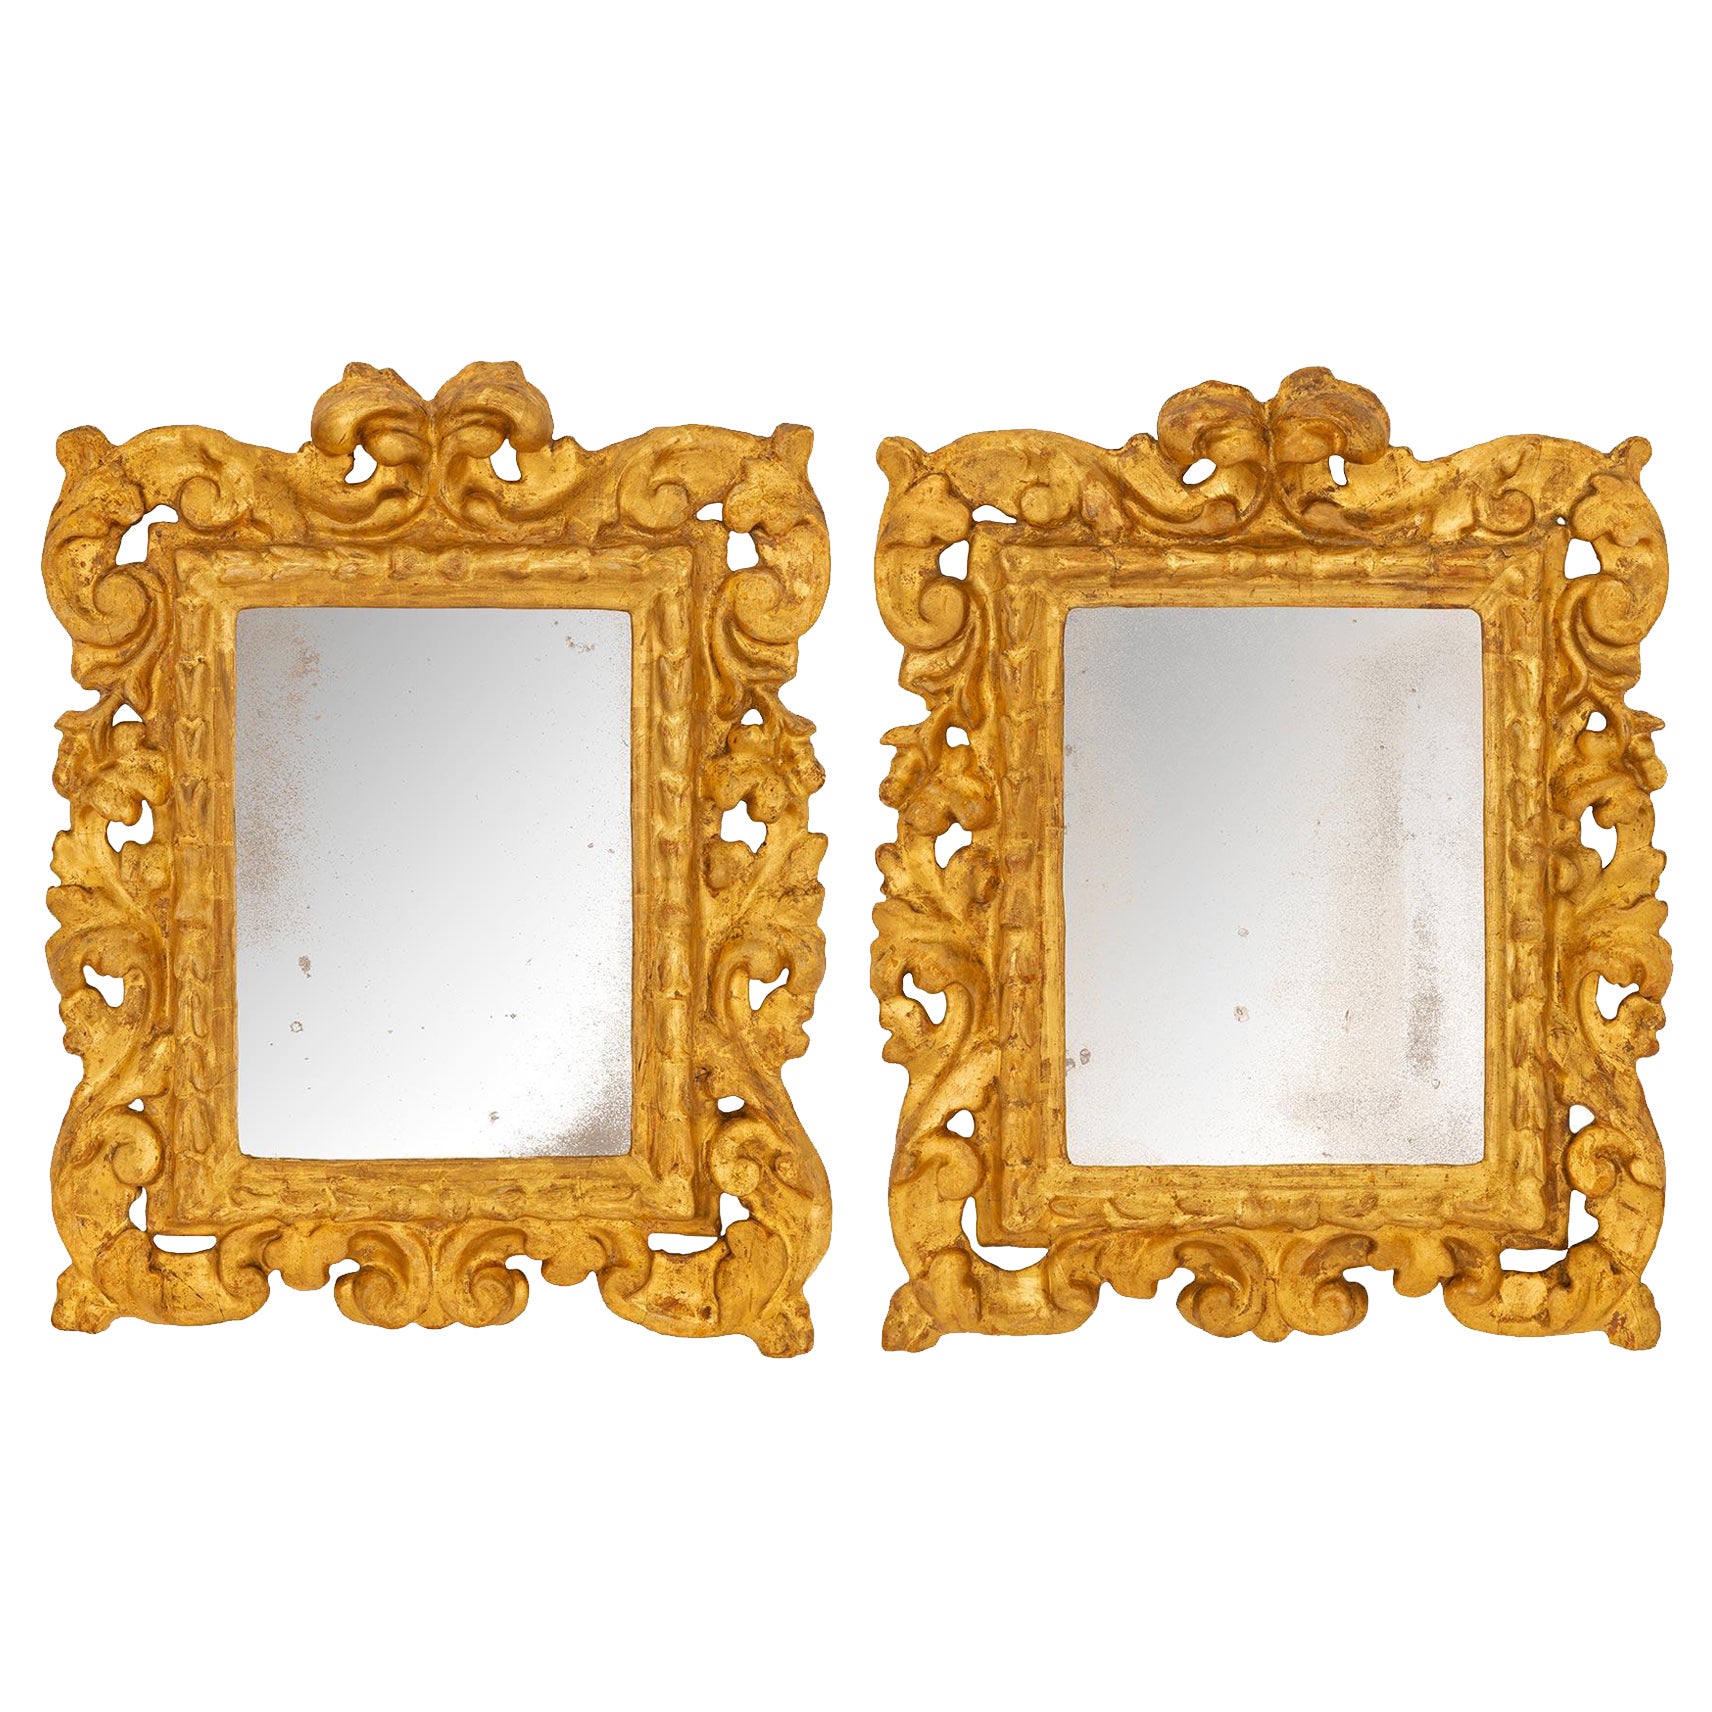 Pair of Italian Early 18th Century Baroque Period Giltwood Mirrors For Sale